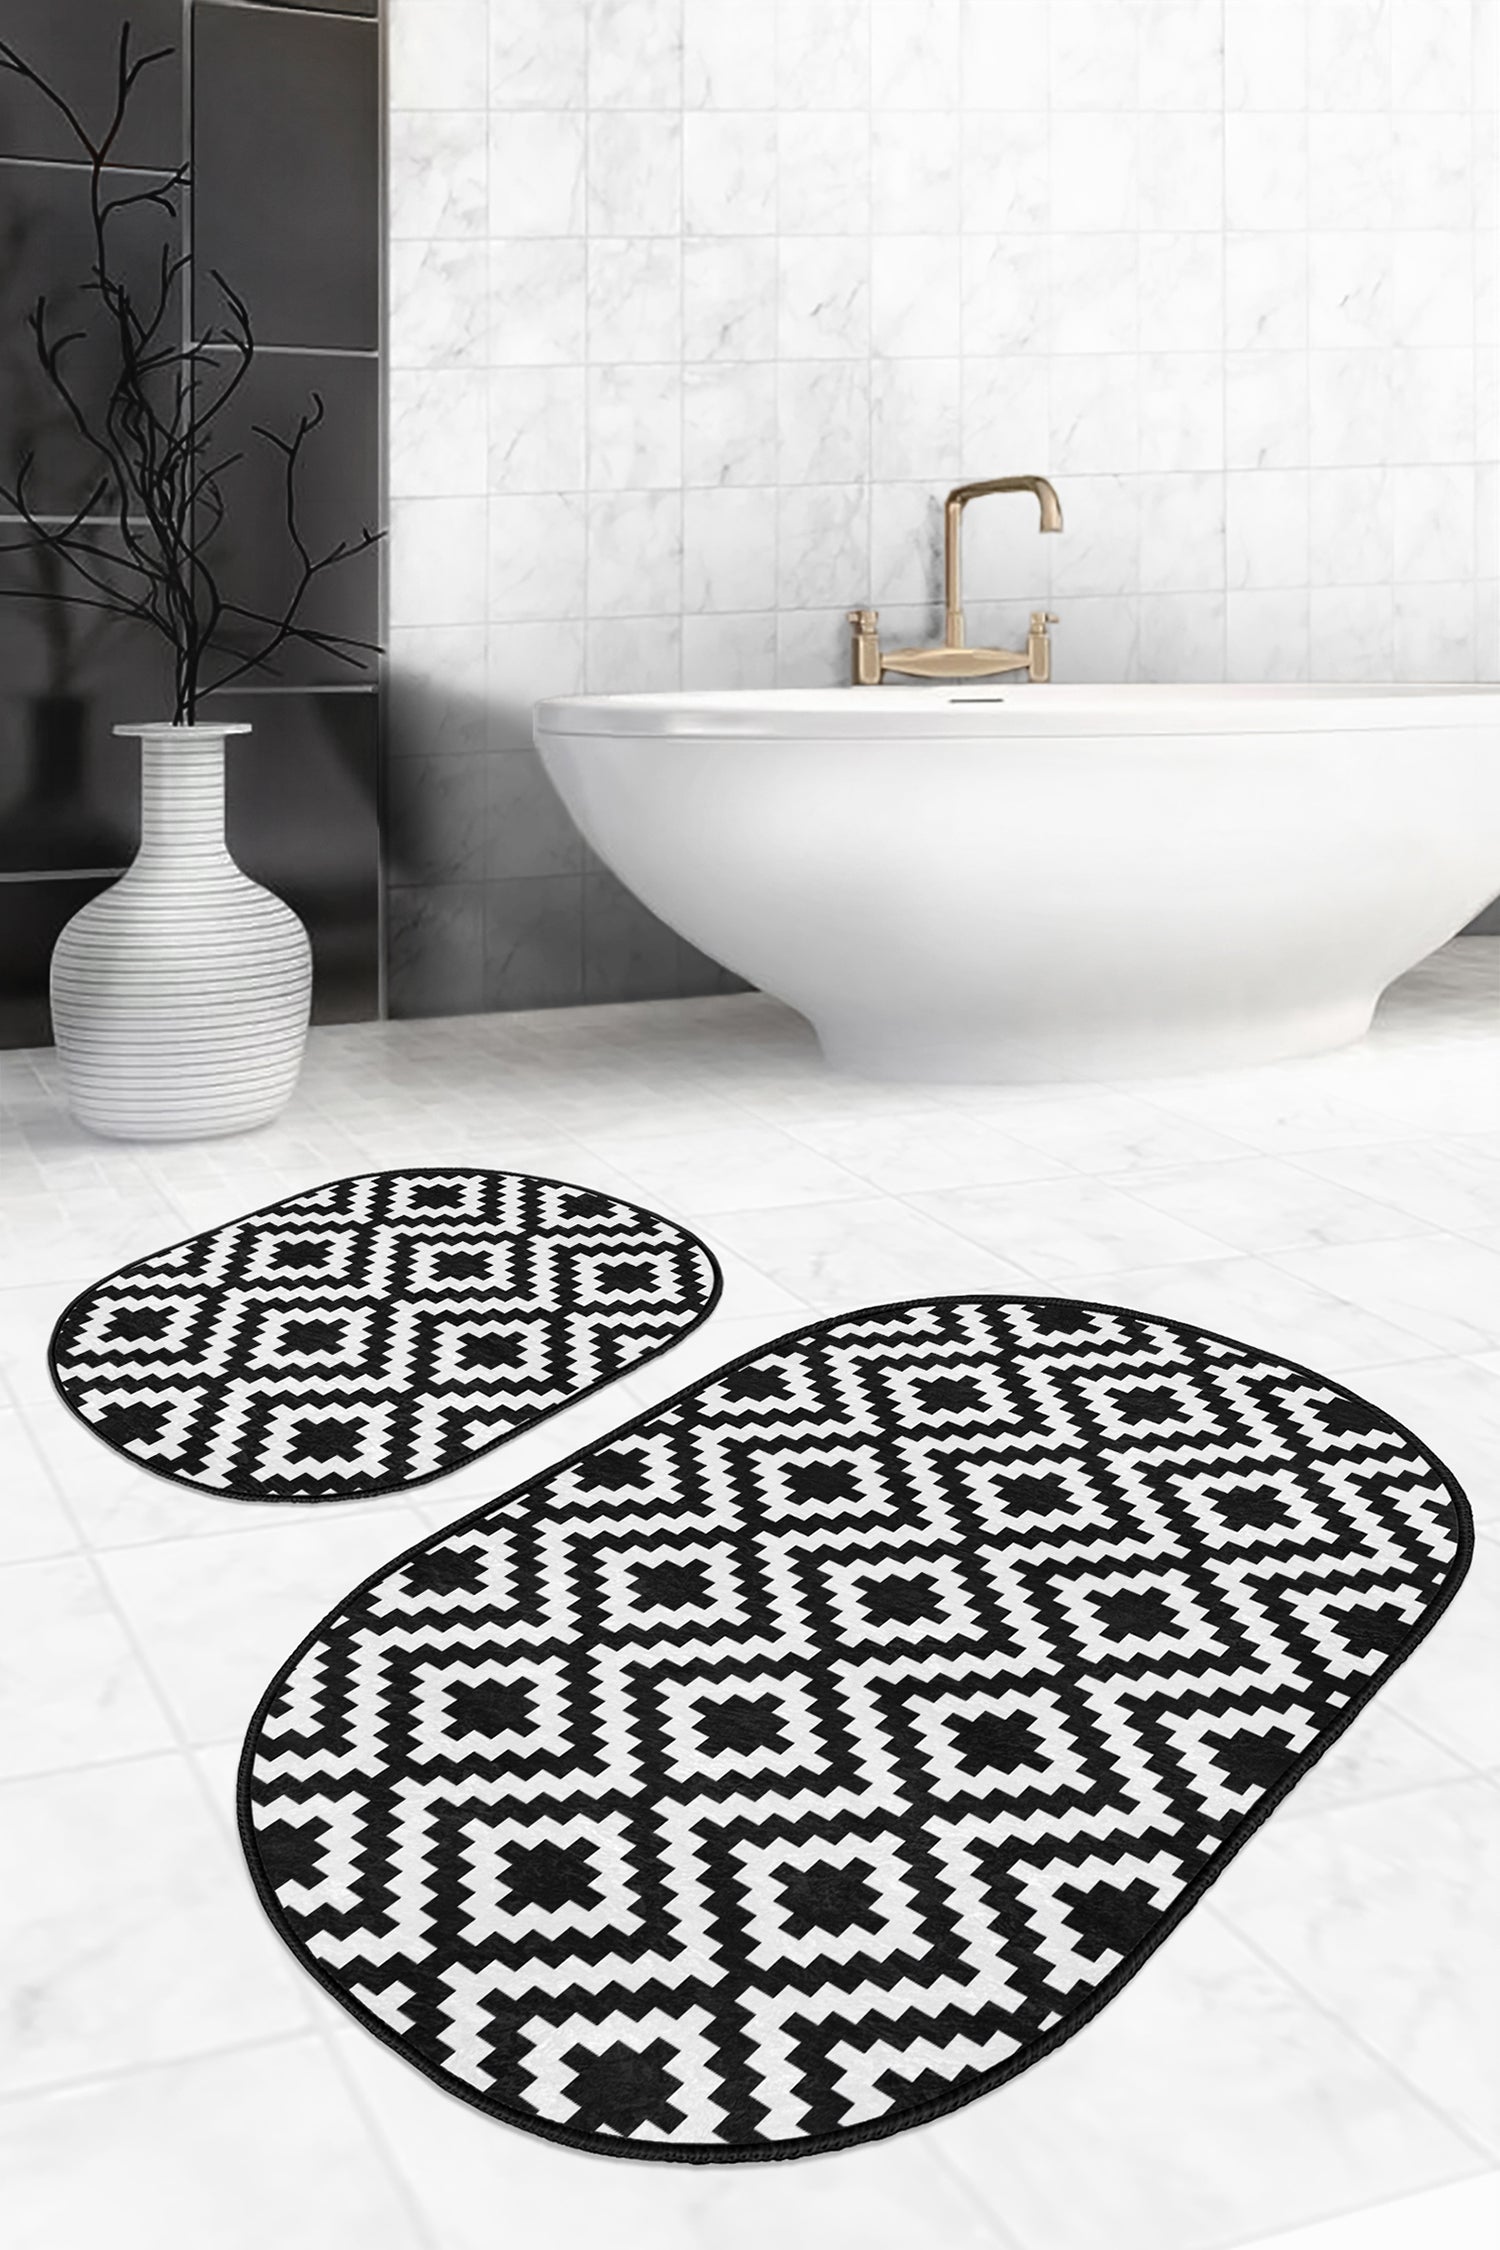 Functional and Stylish Bath Mat Set with Black and White Craftsmanship